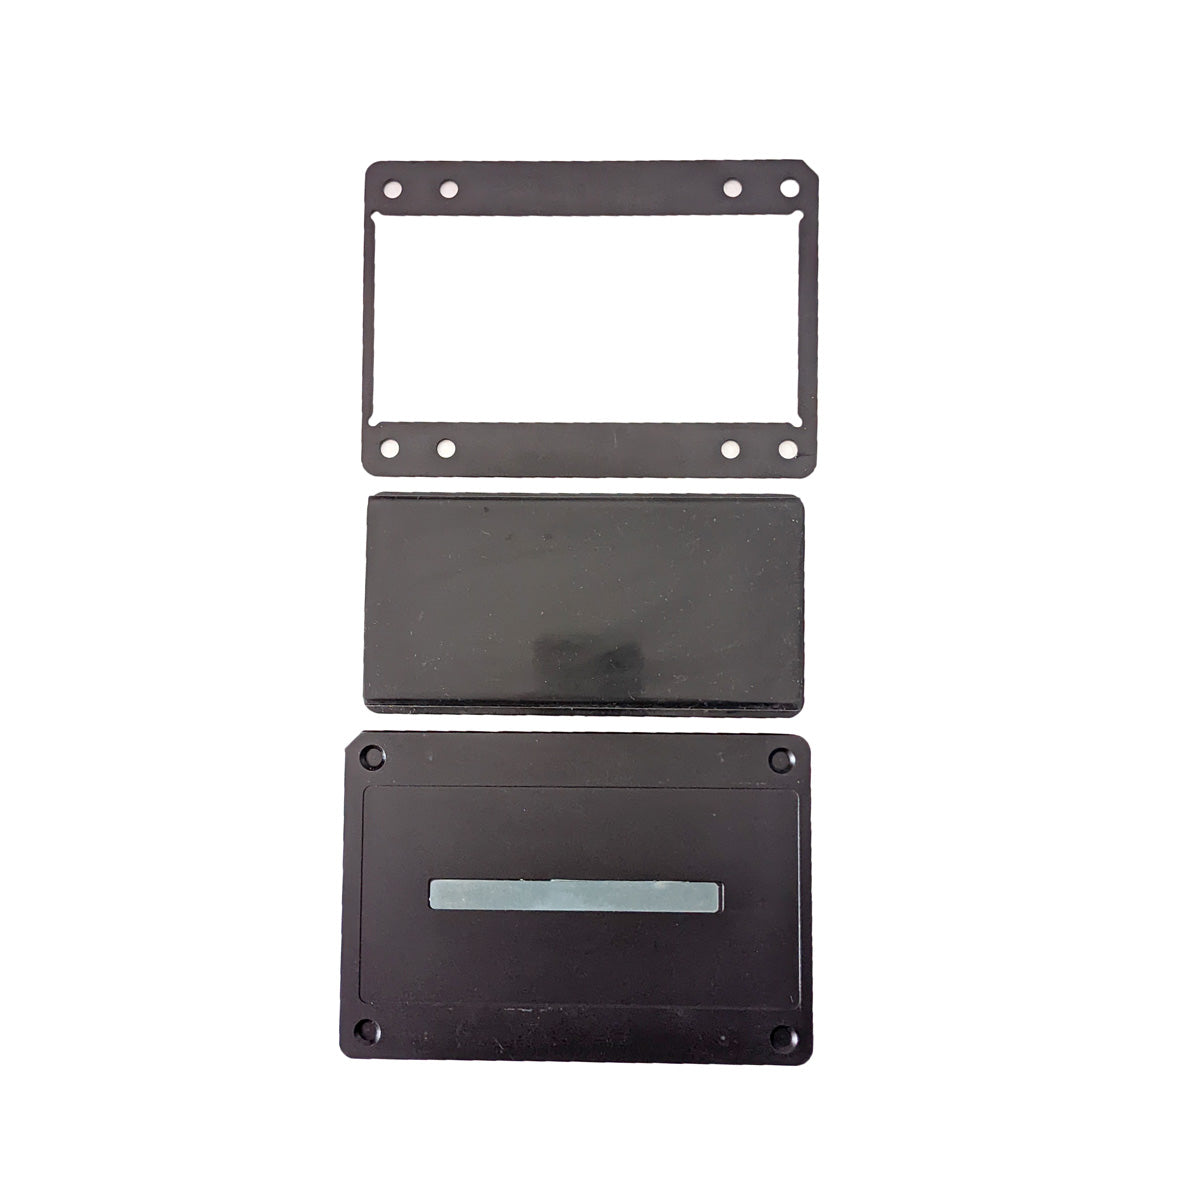 Edge Mold for LCD OCA Alignment and Lamination